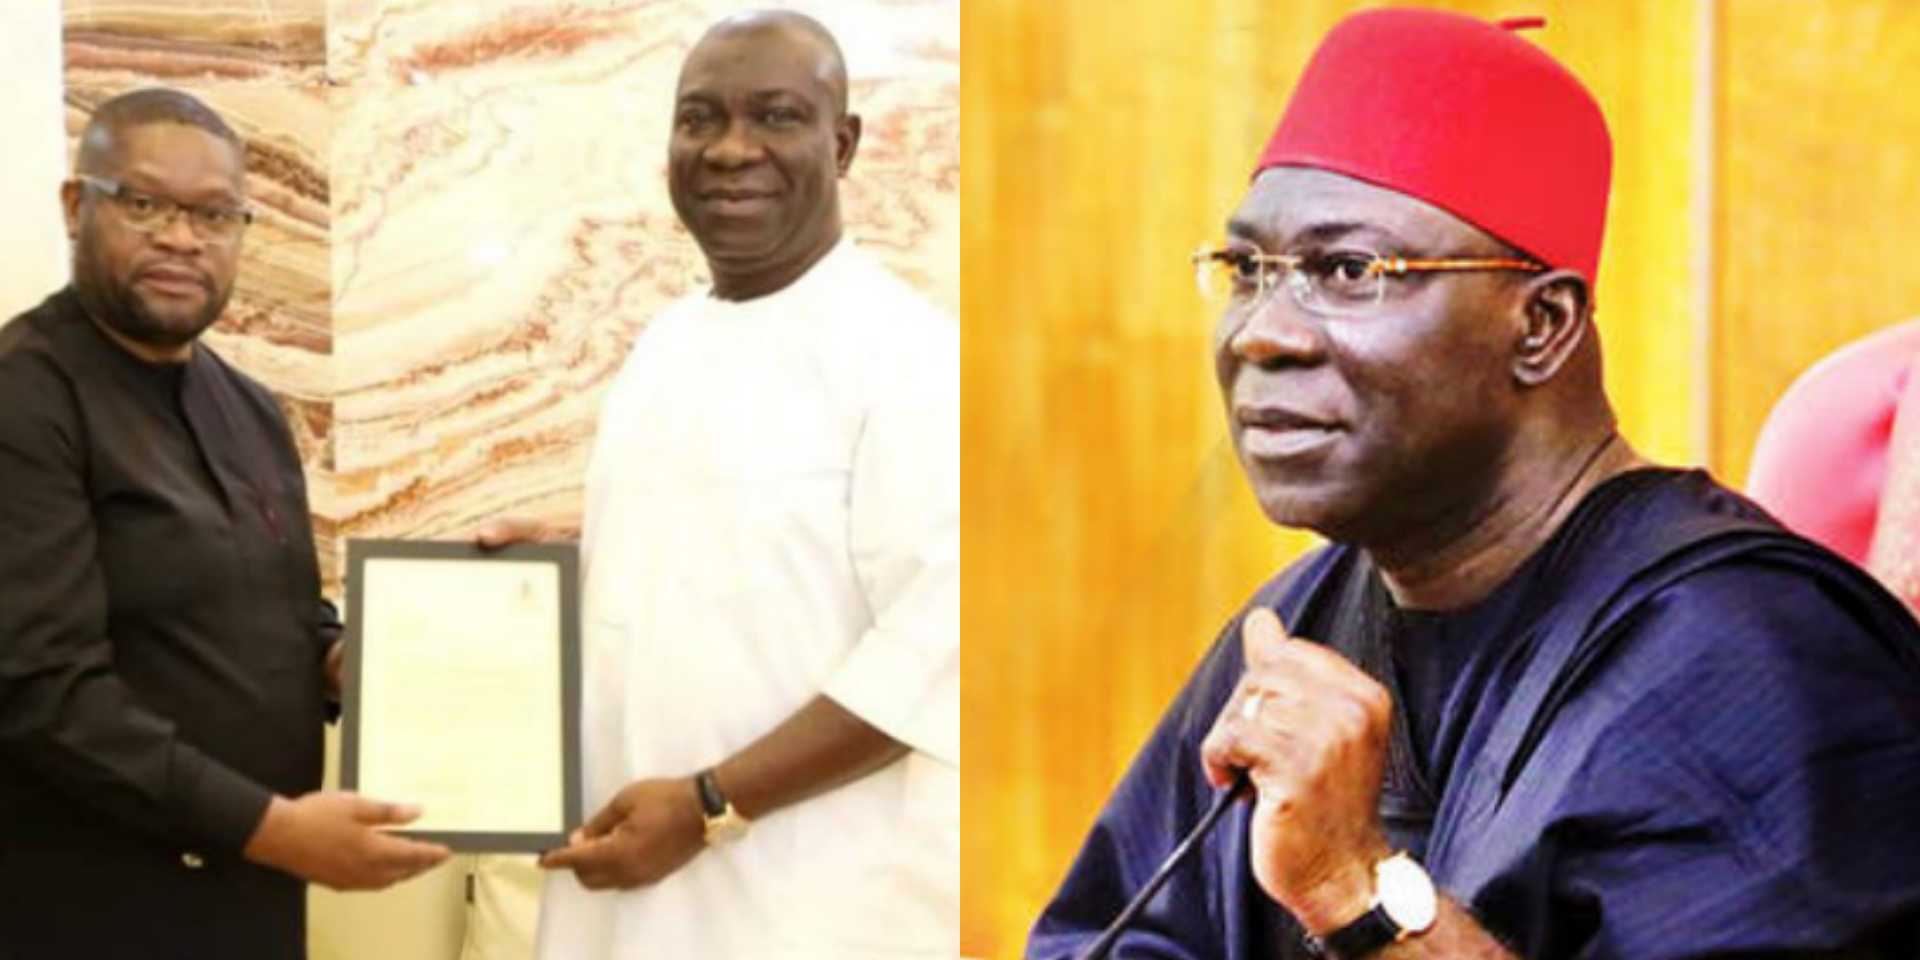 Days after his appointment, UK university suspends Sen. Ike Ekweremadu following his trafficking case